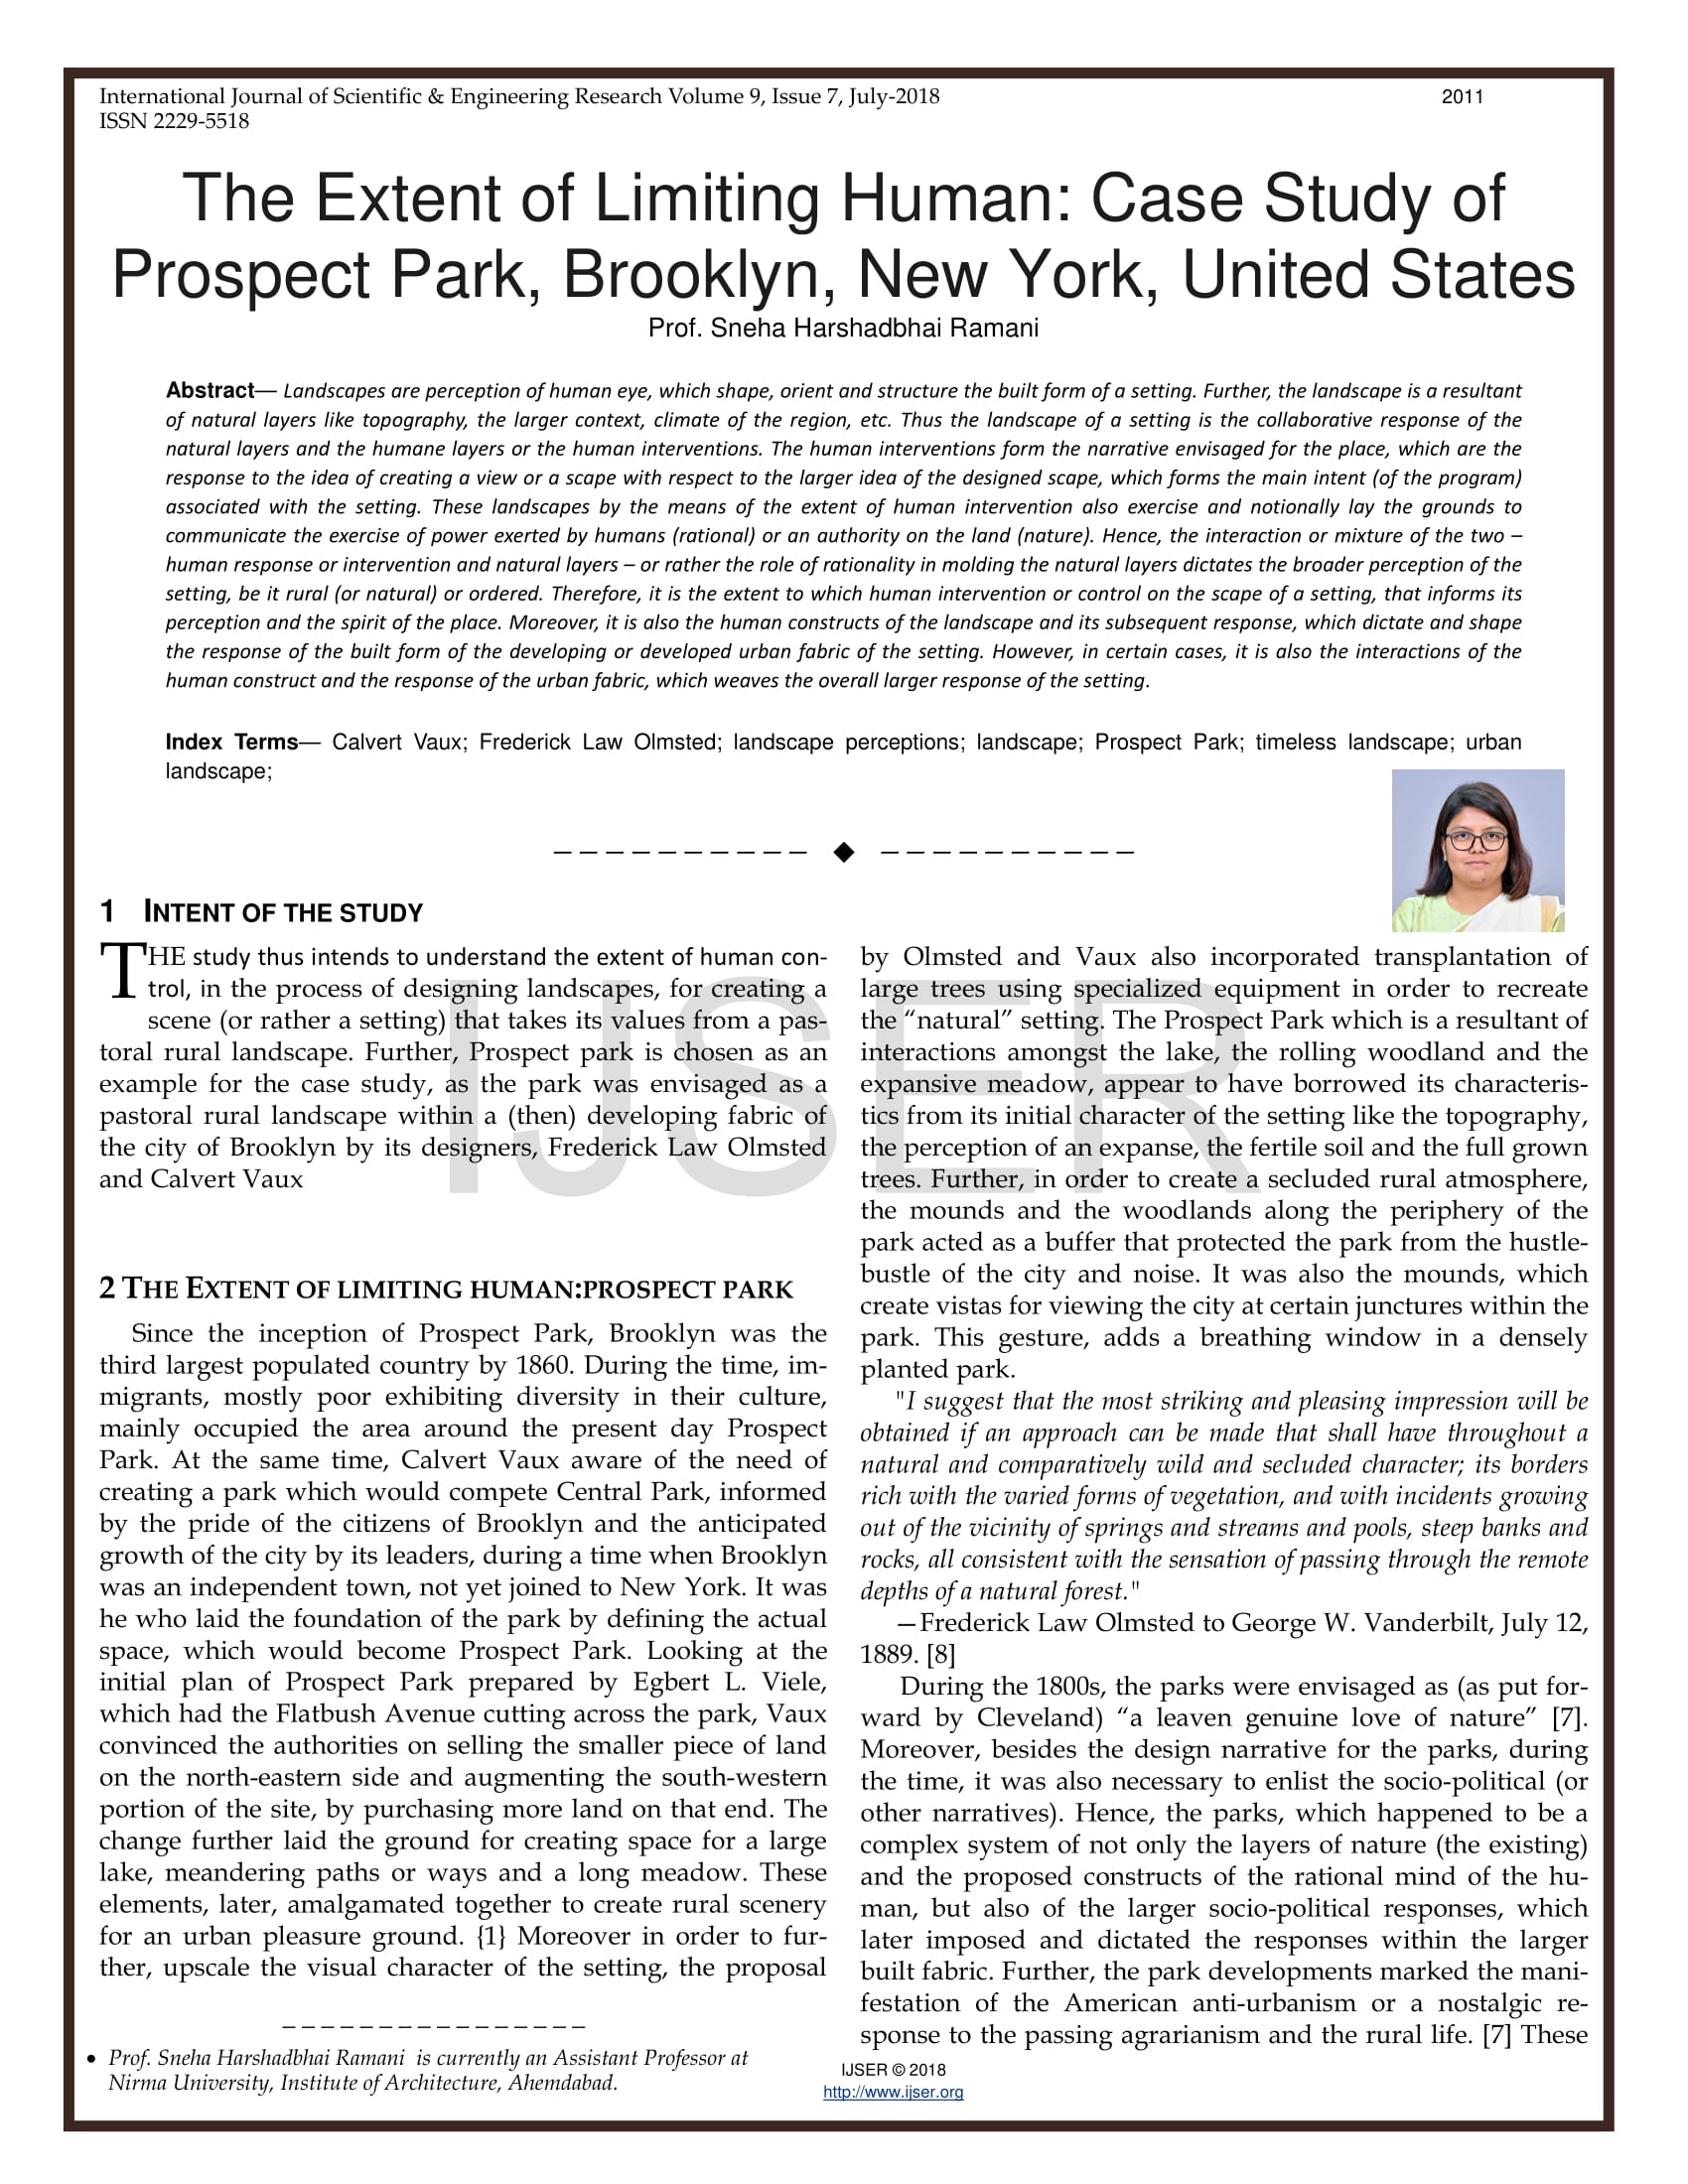 The Extent of Limiting Human: Case Study of Prospect Park, Brooklyn, New York, United States